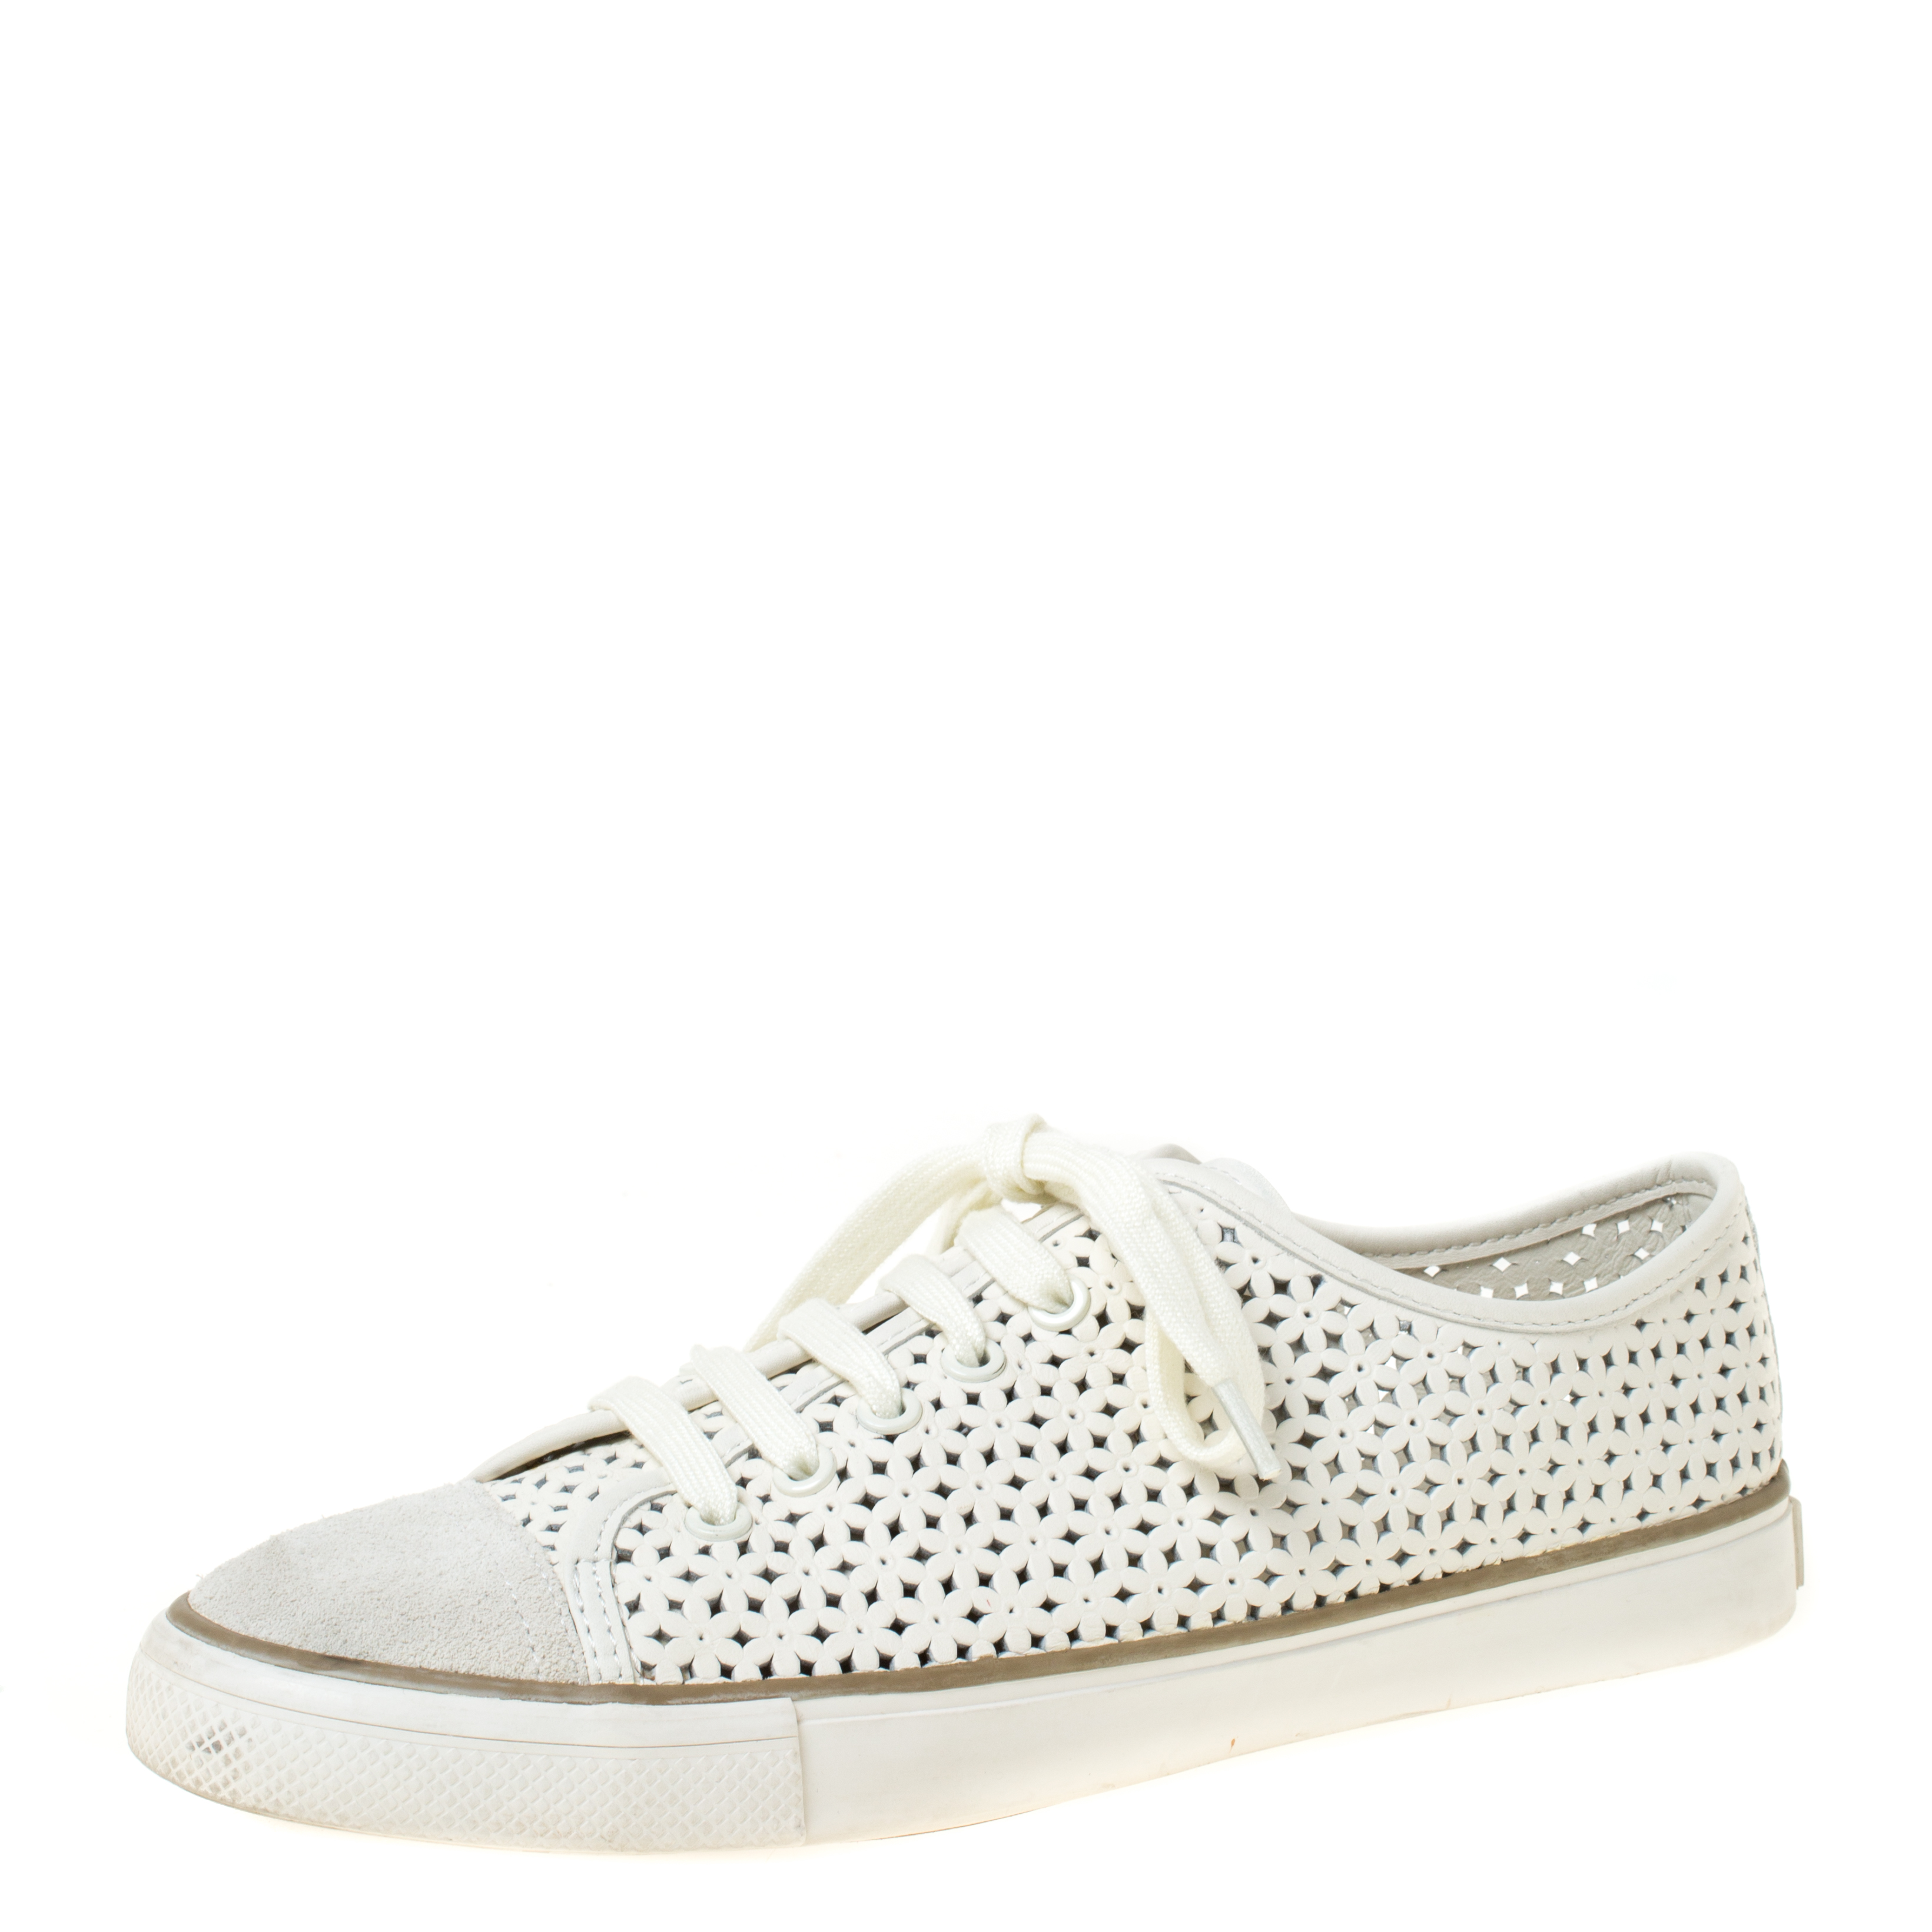 Tory Burch White Perforated Leather Daisy Lace Up Sneakers Size 40 Tory ...